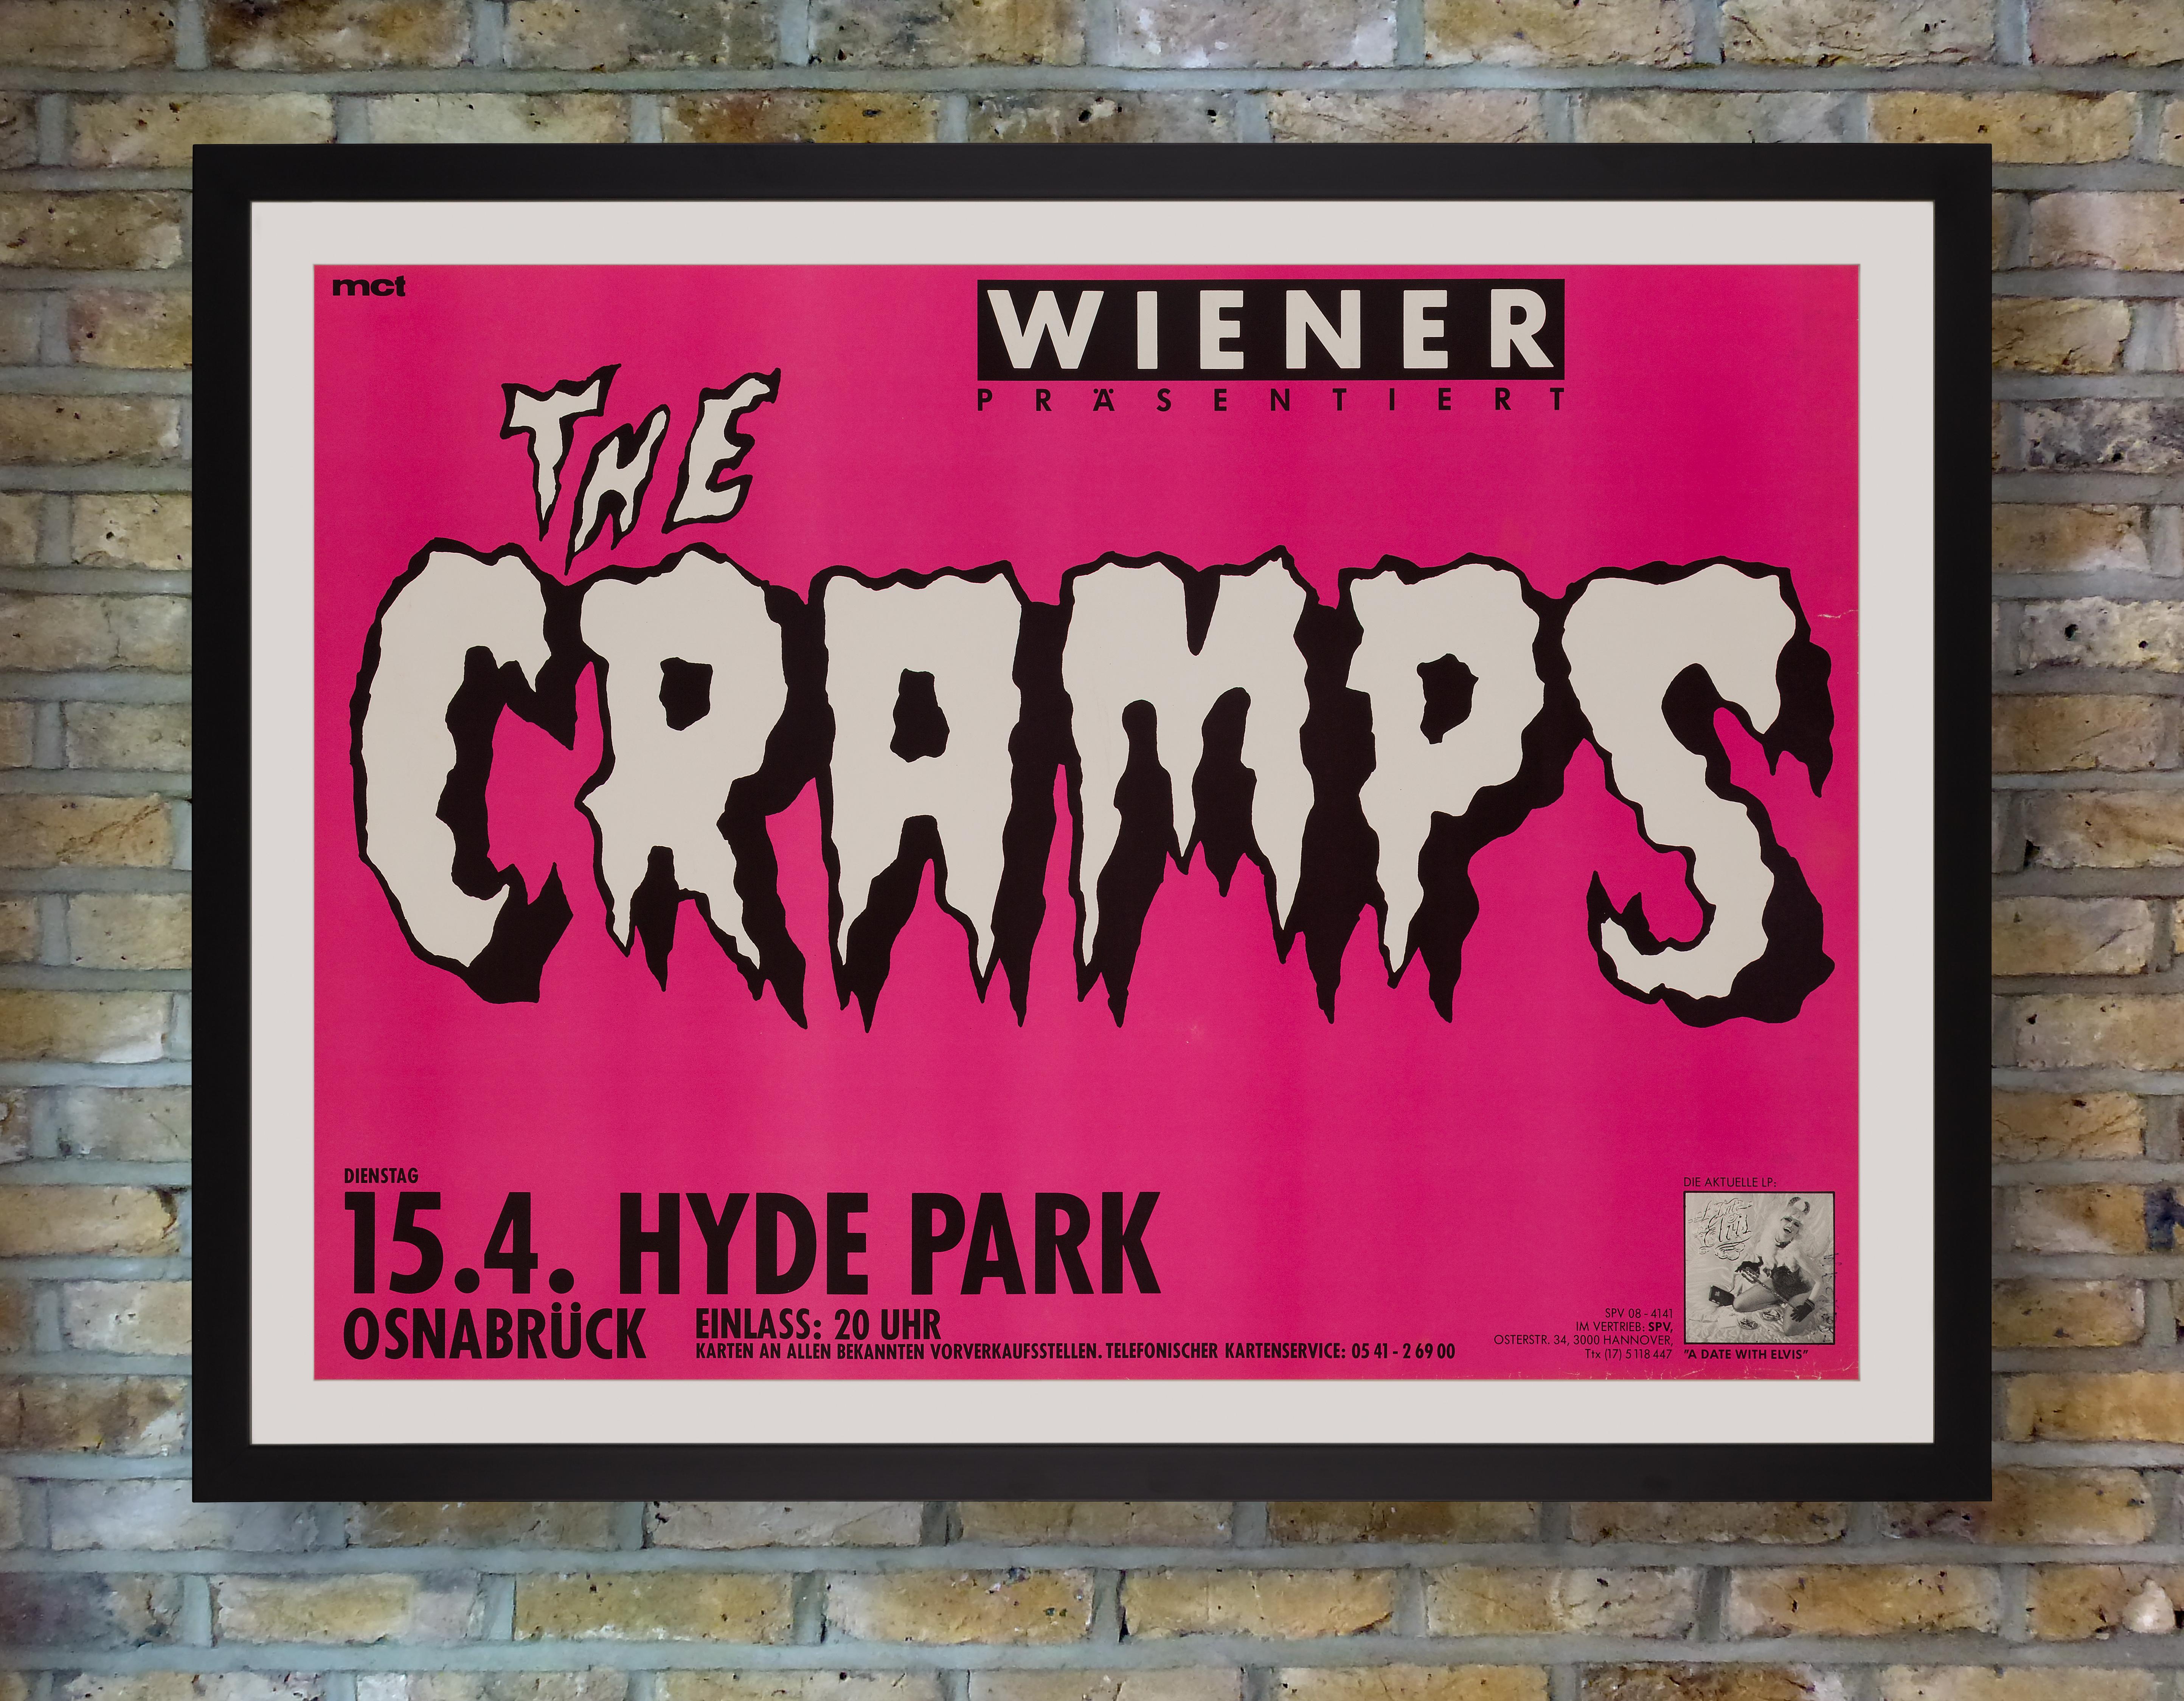 A vibrant pink poster for a performance by American garage punk band The Cramps at Hyde Park, Osnabrück, Germany on 15 April 1986 in support of their third studio album 'A Date With Elvis.' Part of the CBGB punk rock scene in New York, The Cramps